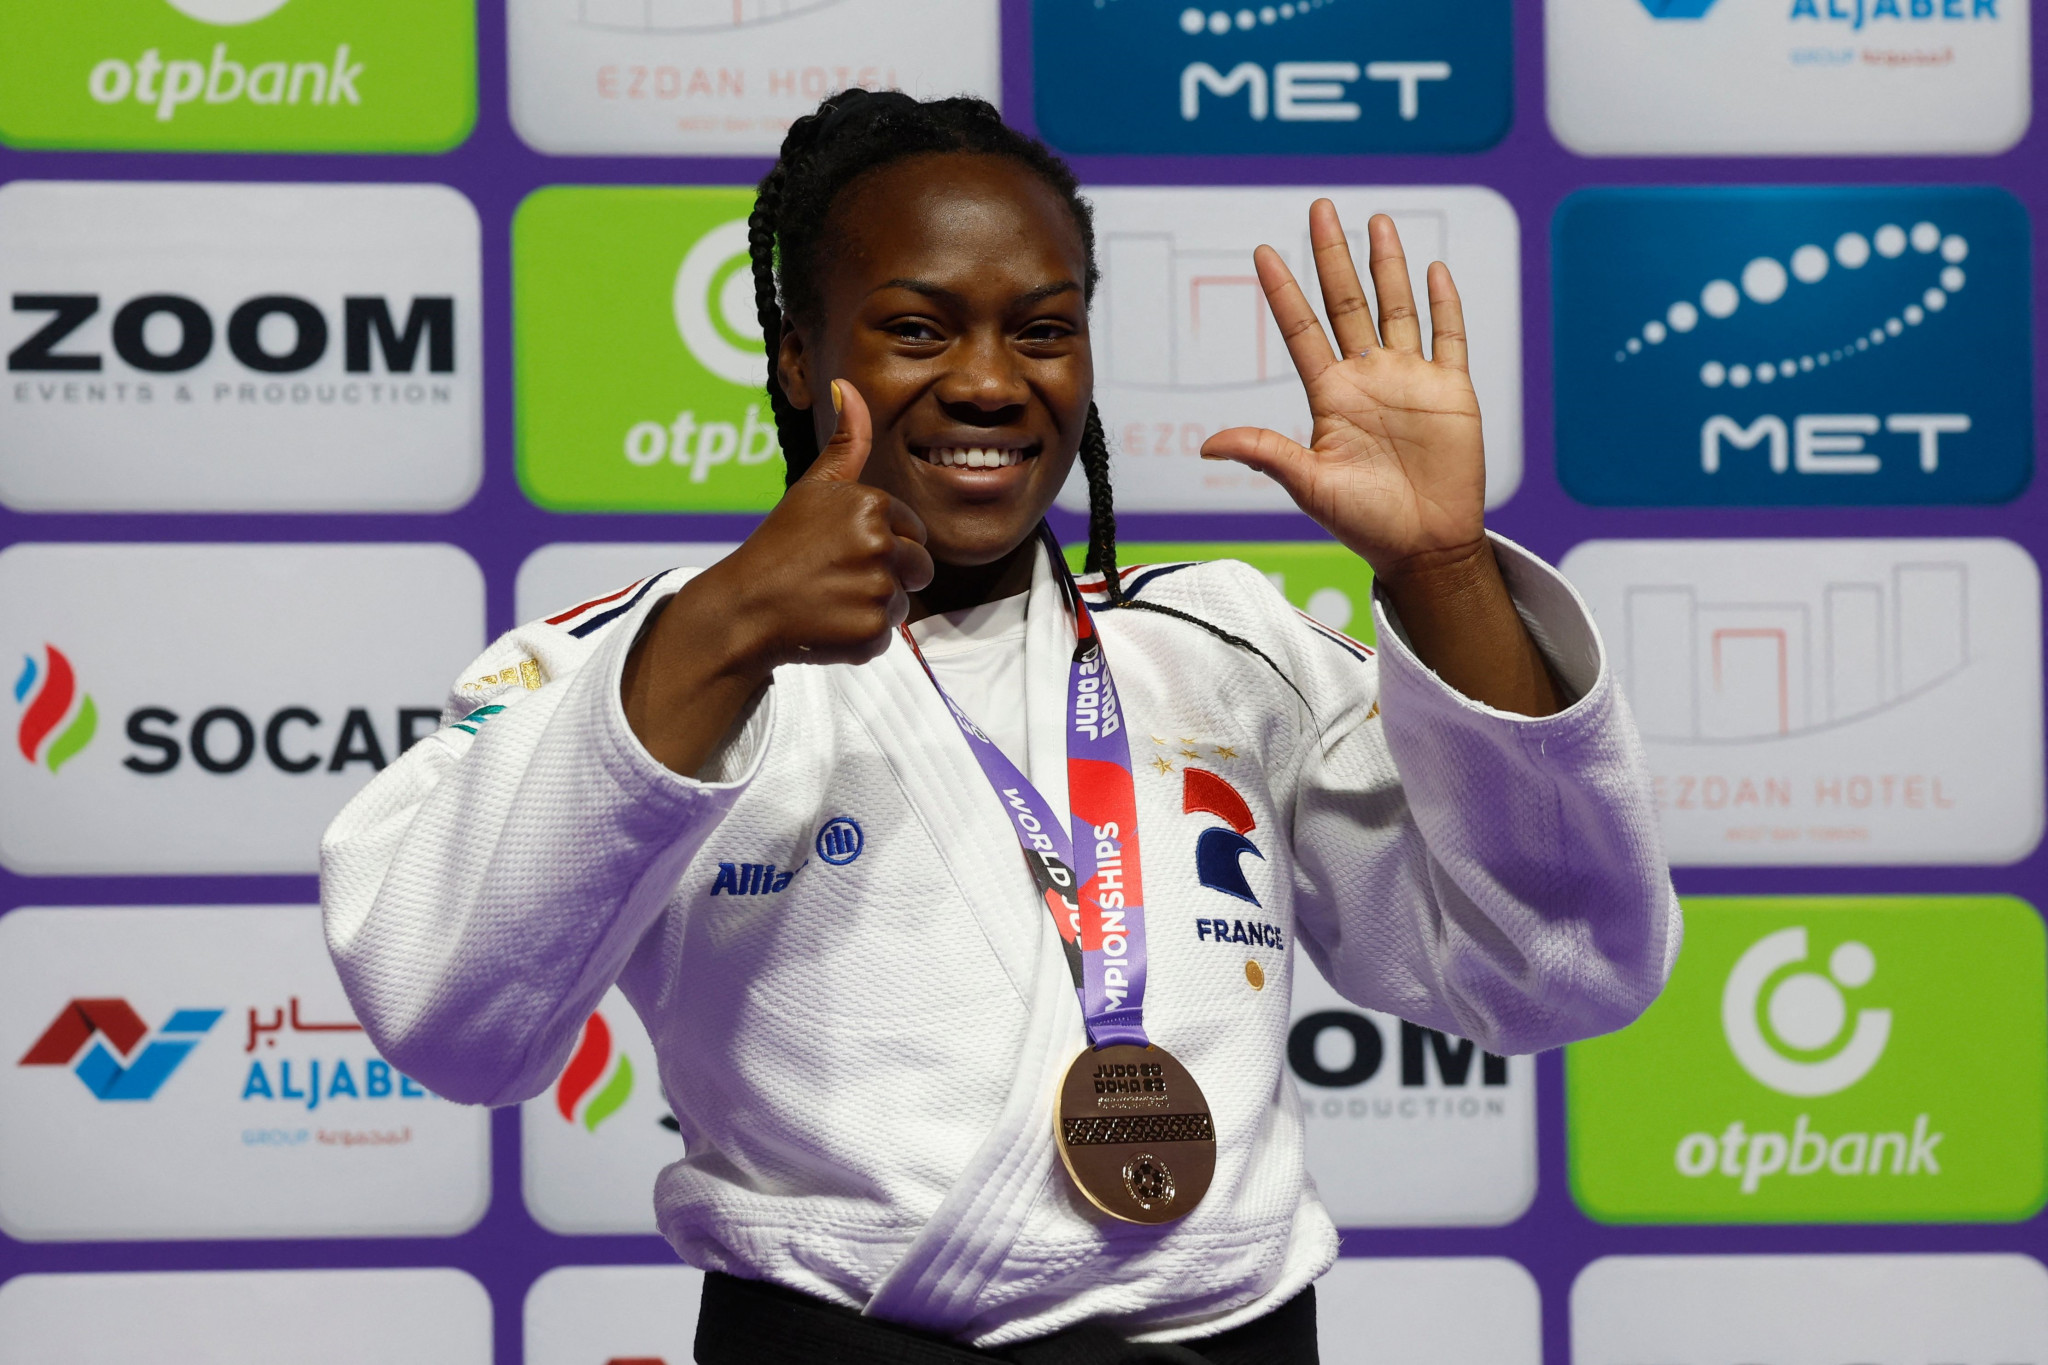 France's Clarisse Agbégnénou celebrates winning her sixth individual world title in Doha ©Getty Images